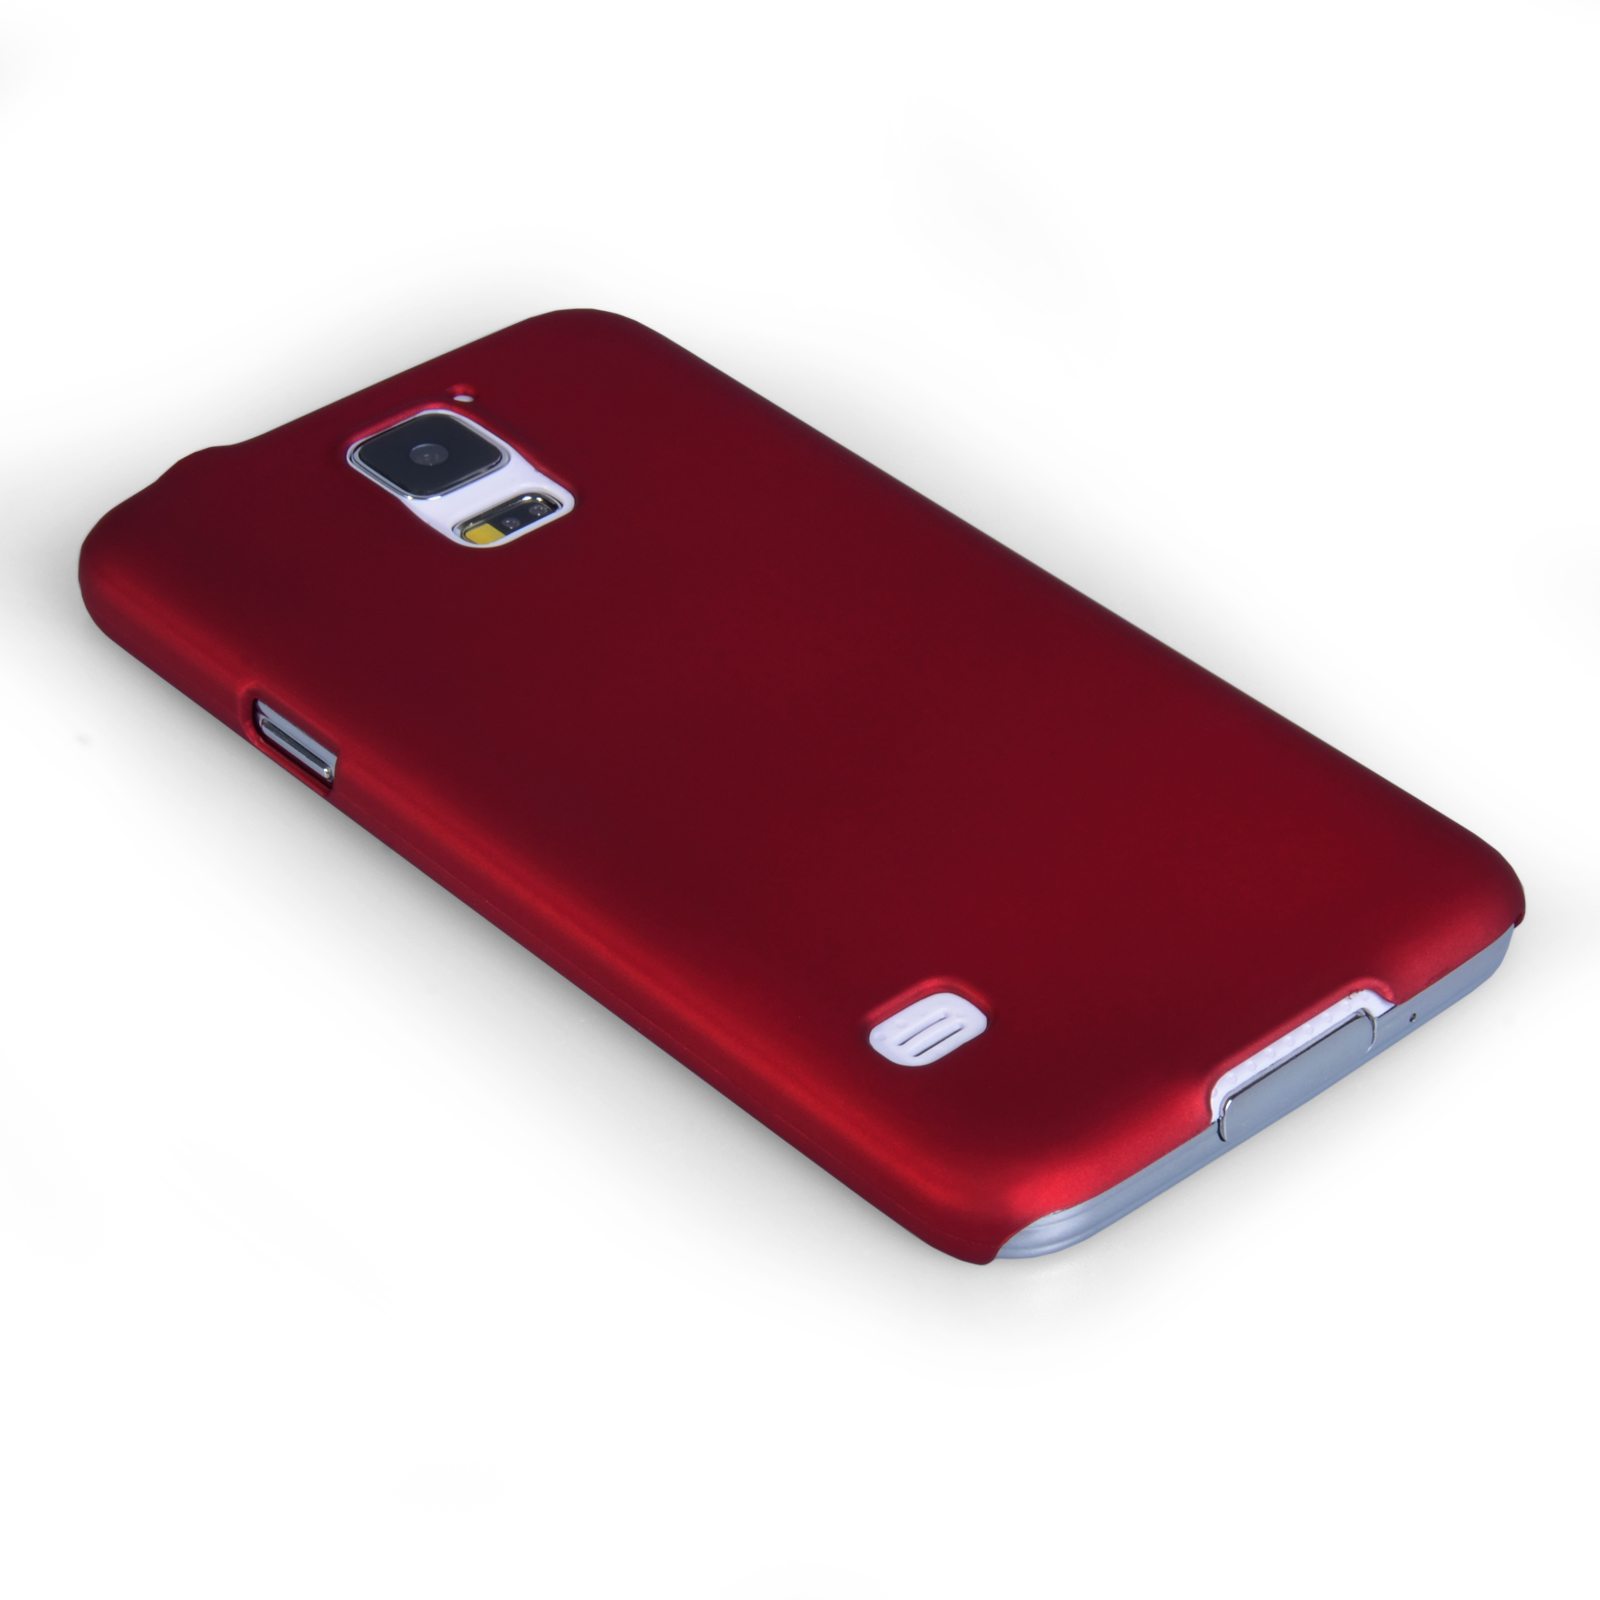 YouSave Accessories Samsung Galaxy S5 Hard Hybrid Case - Red